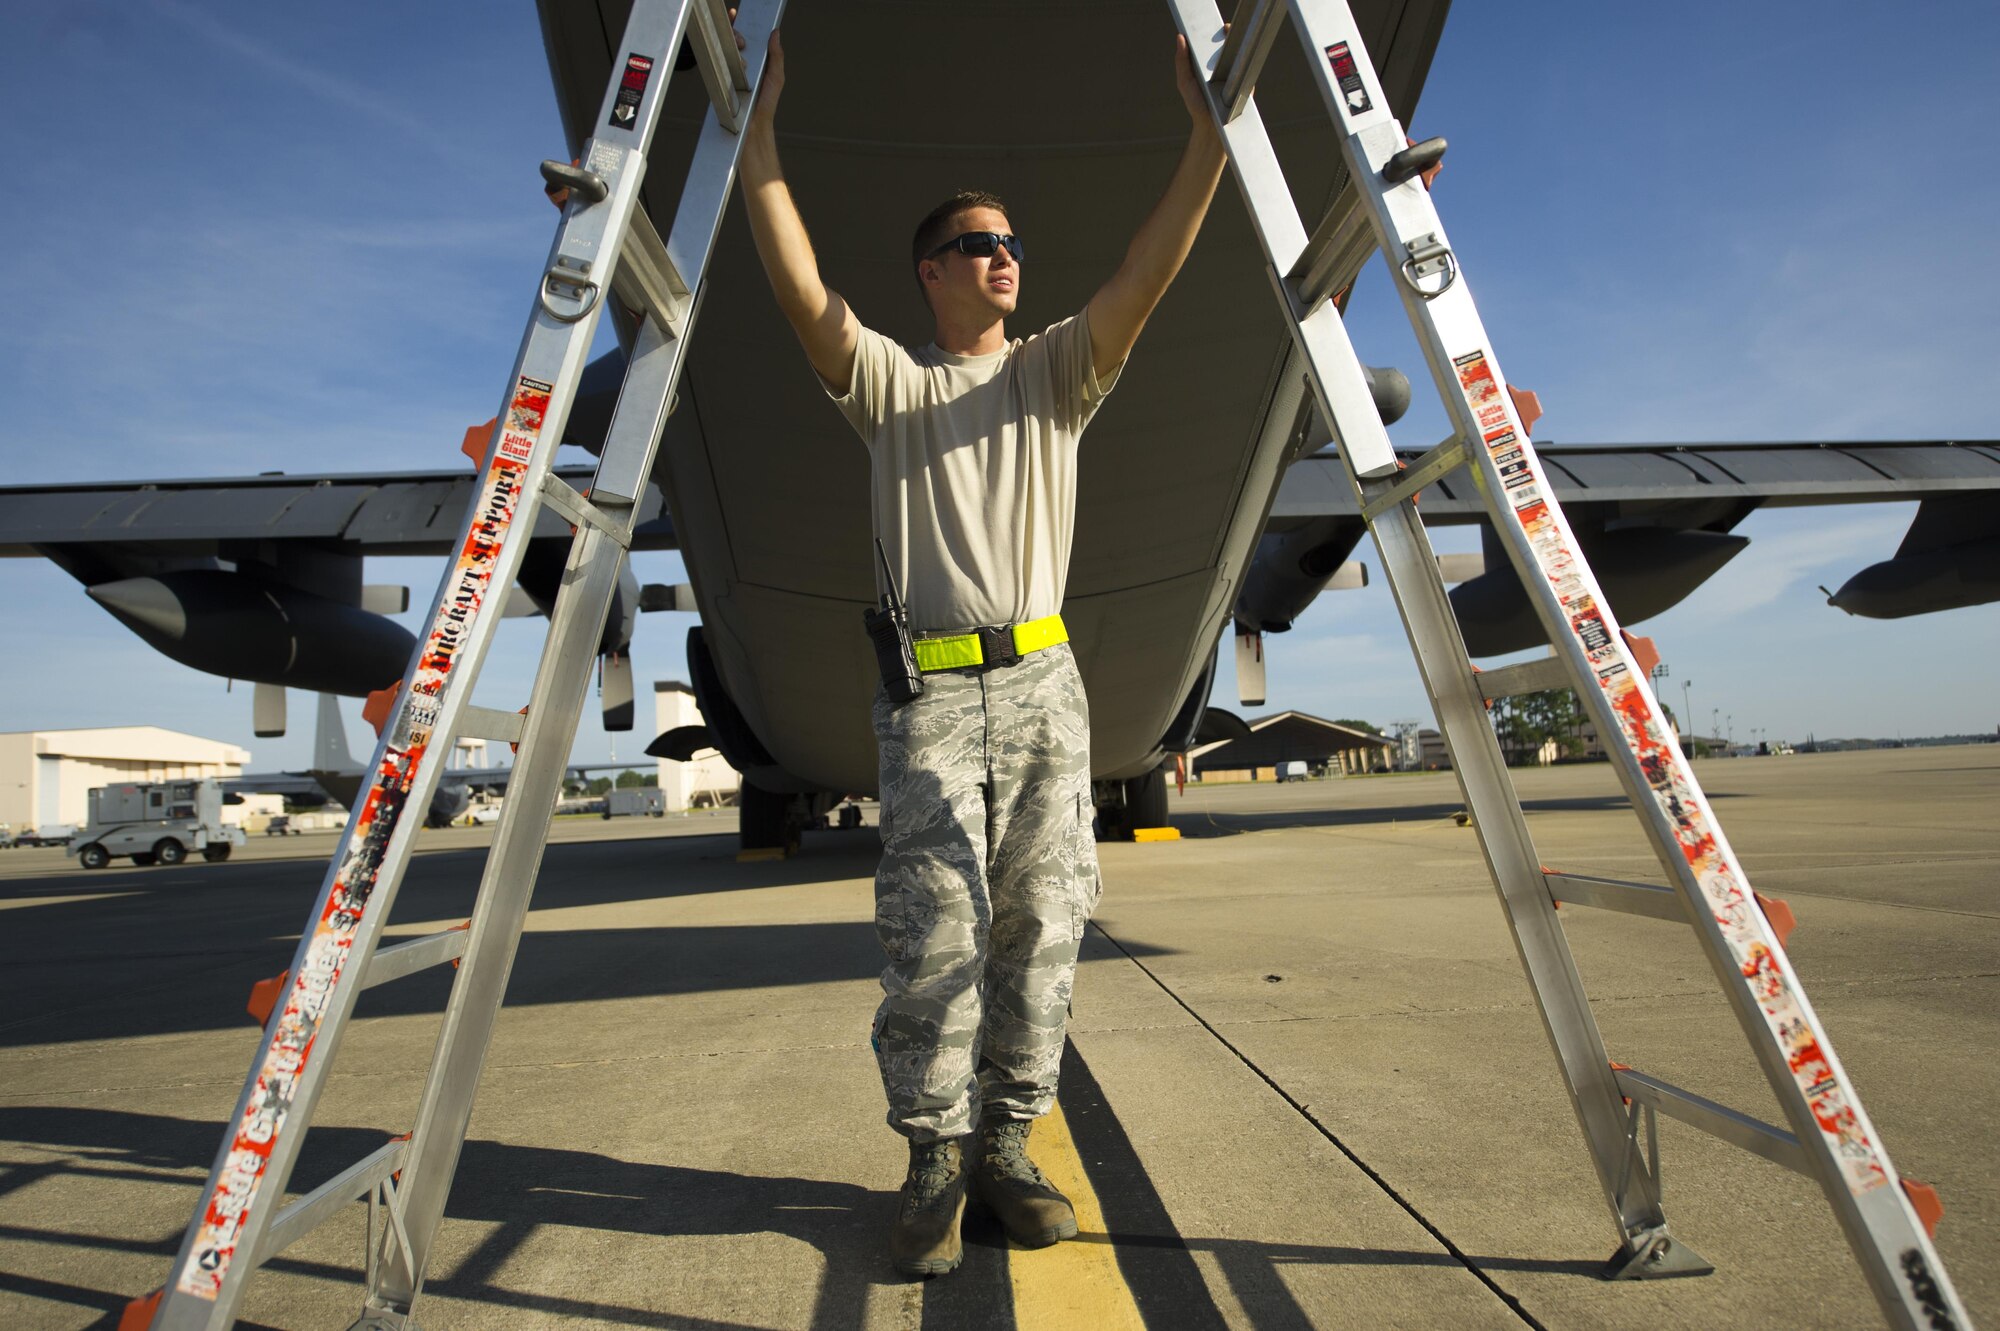 Staff Sgt. Nick Kimmel, a crew chief assigned to the 901st Special Operations Aircraft Maintenance Squadron, holds a ladder steady while working on a MC-130H Combat Talon II aircraft before pre-flight inspection at Hurlburt Field, Fla., July 20, 2016. Crew chief’s take care of day-to-day maintenance, including end-of-runway, post-flight, preflight, thru-flight, special inspections and phase inspections. (U.S. Air Force photo by Airman 1st Class Isaac O. Guest)